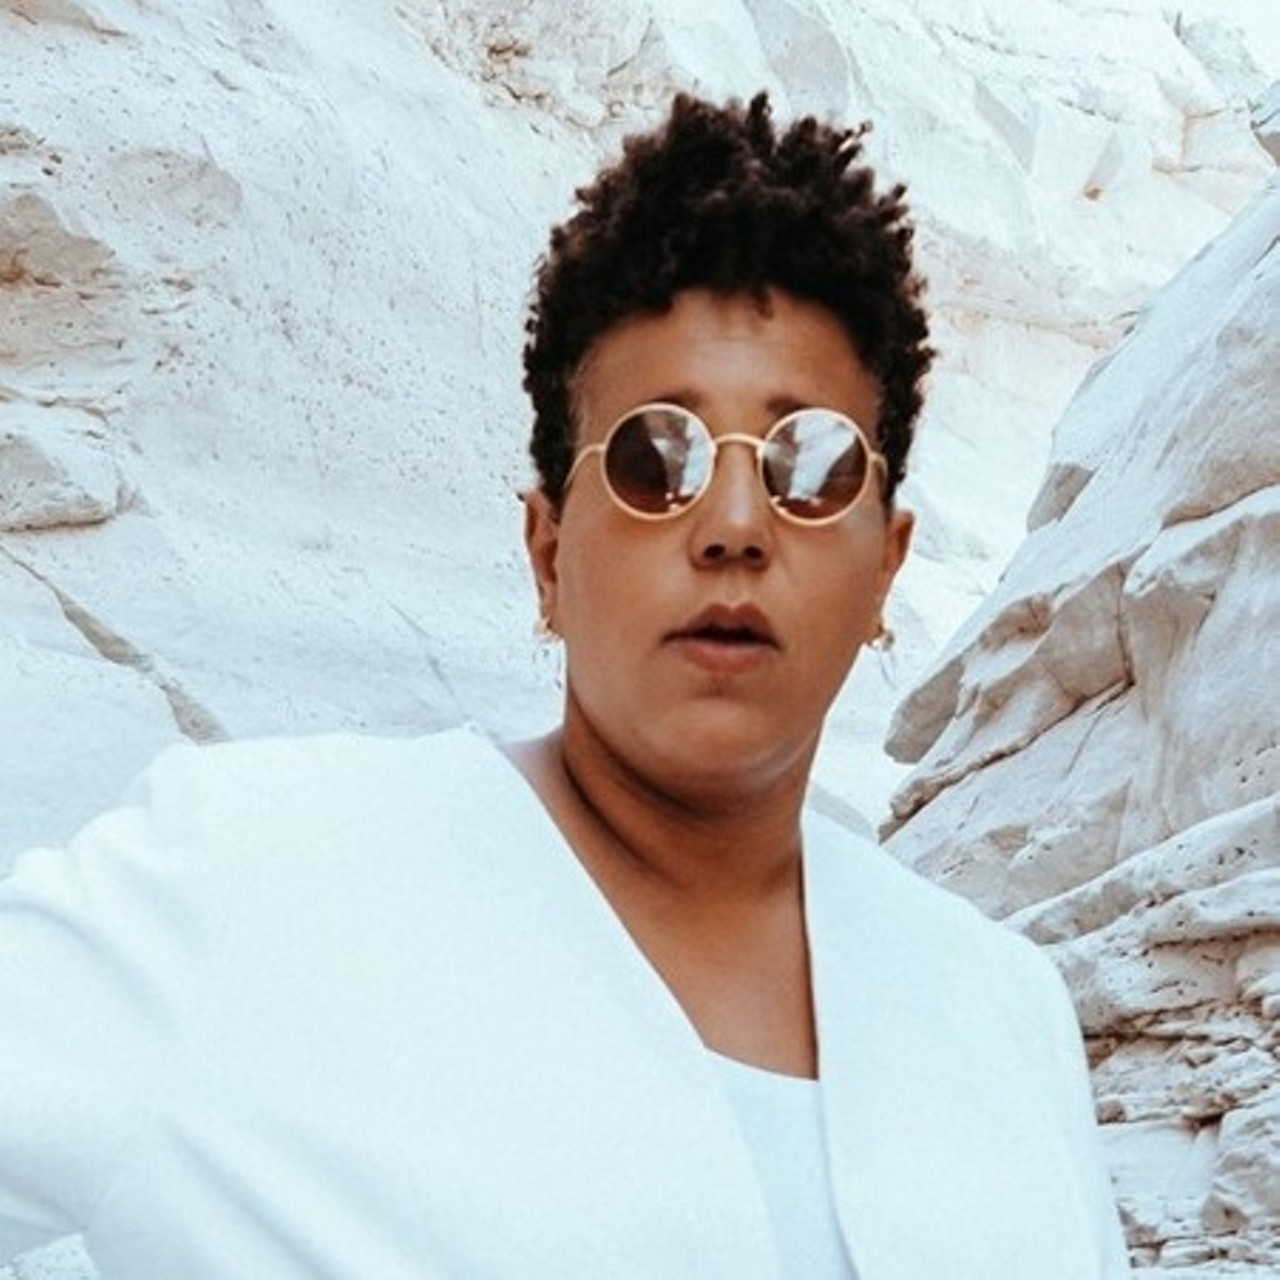 Brittany Howard
Sold out, Tuesday, March 24, 7pm, Aztec Theatre, 104 N. St. Mary’s St., theaztectheatre.com
Frontwoman for the Alabama Shakes, Brittany Howard has made it clear she is quite capable of holding her own as a solo artist.
Photo via Facebook / Brittany Howard